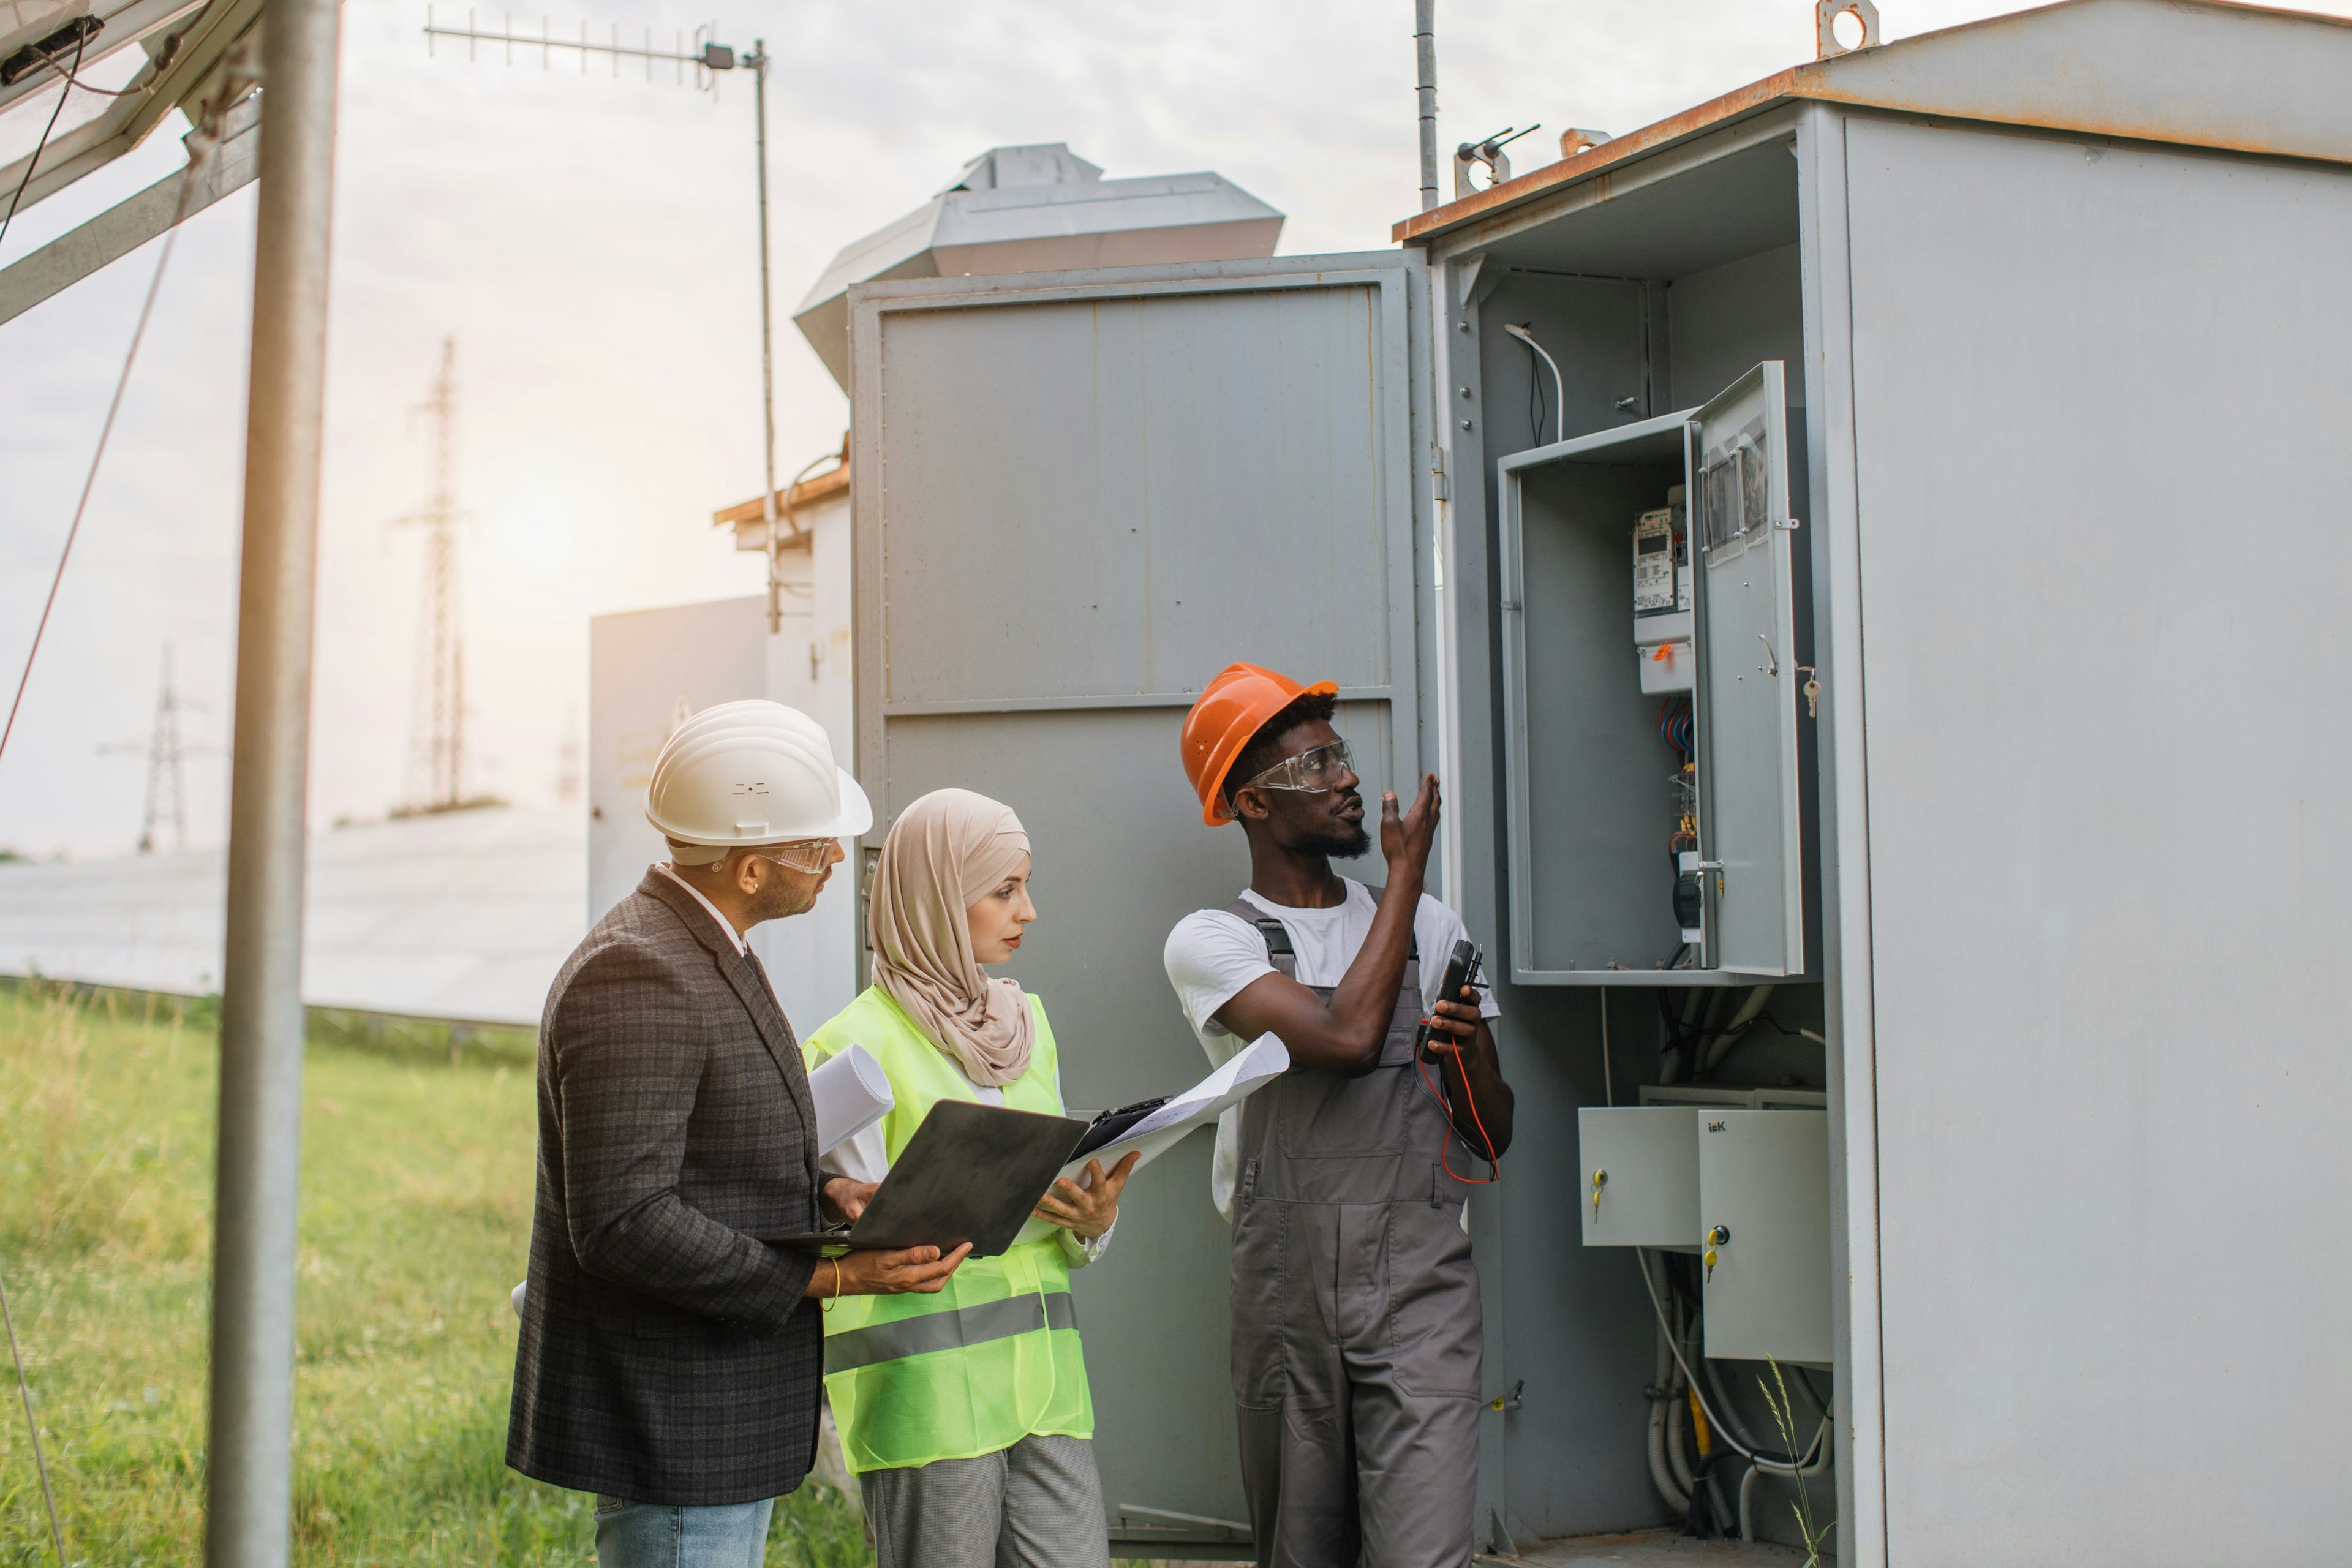 Image of workers inspecting an electrical panel